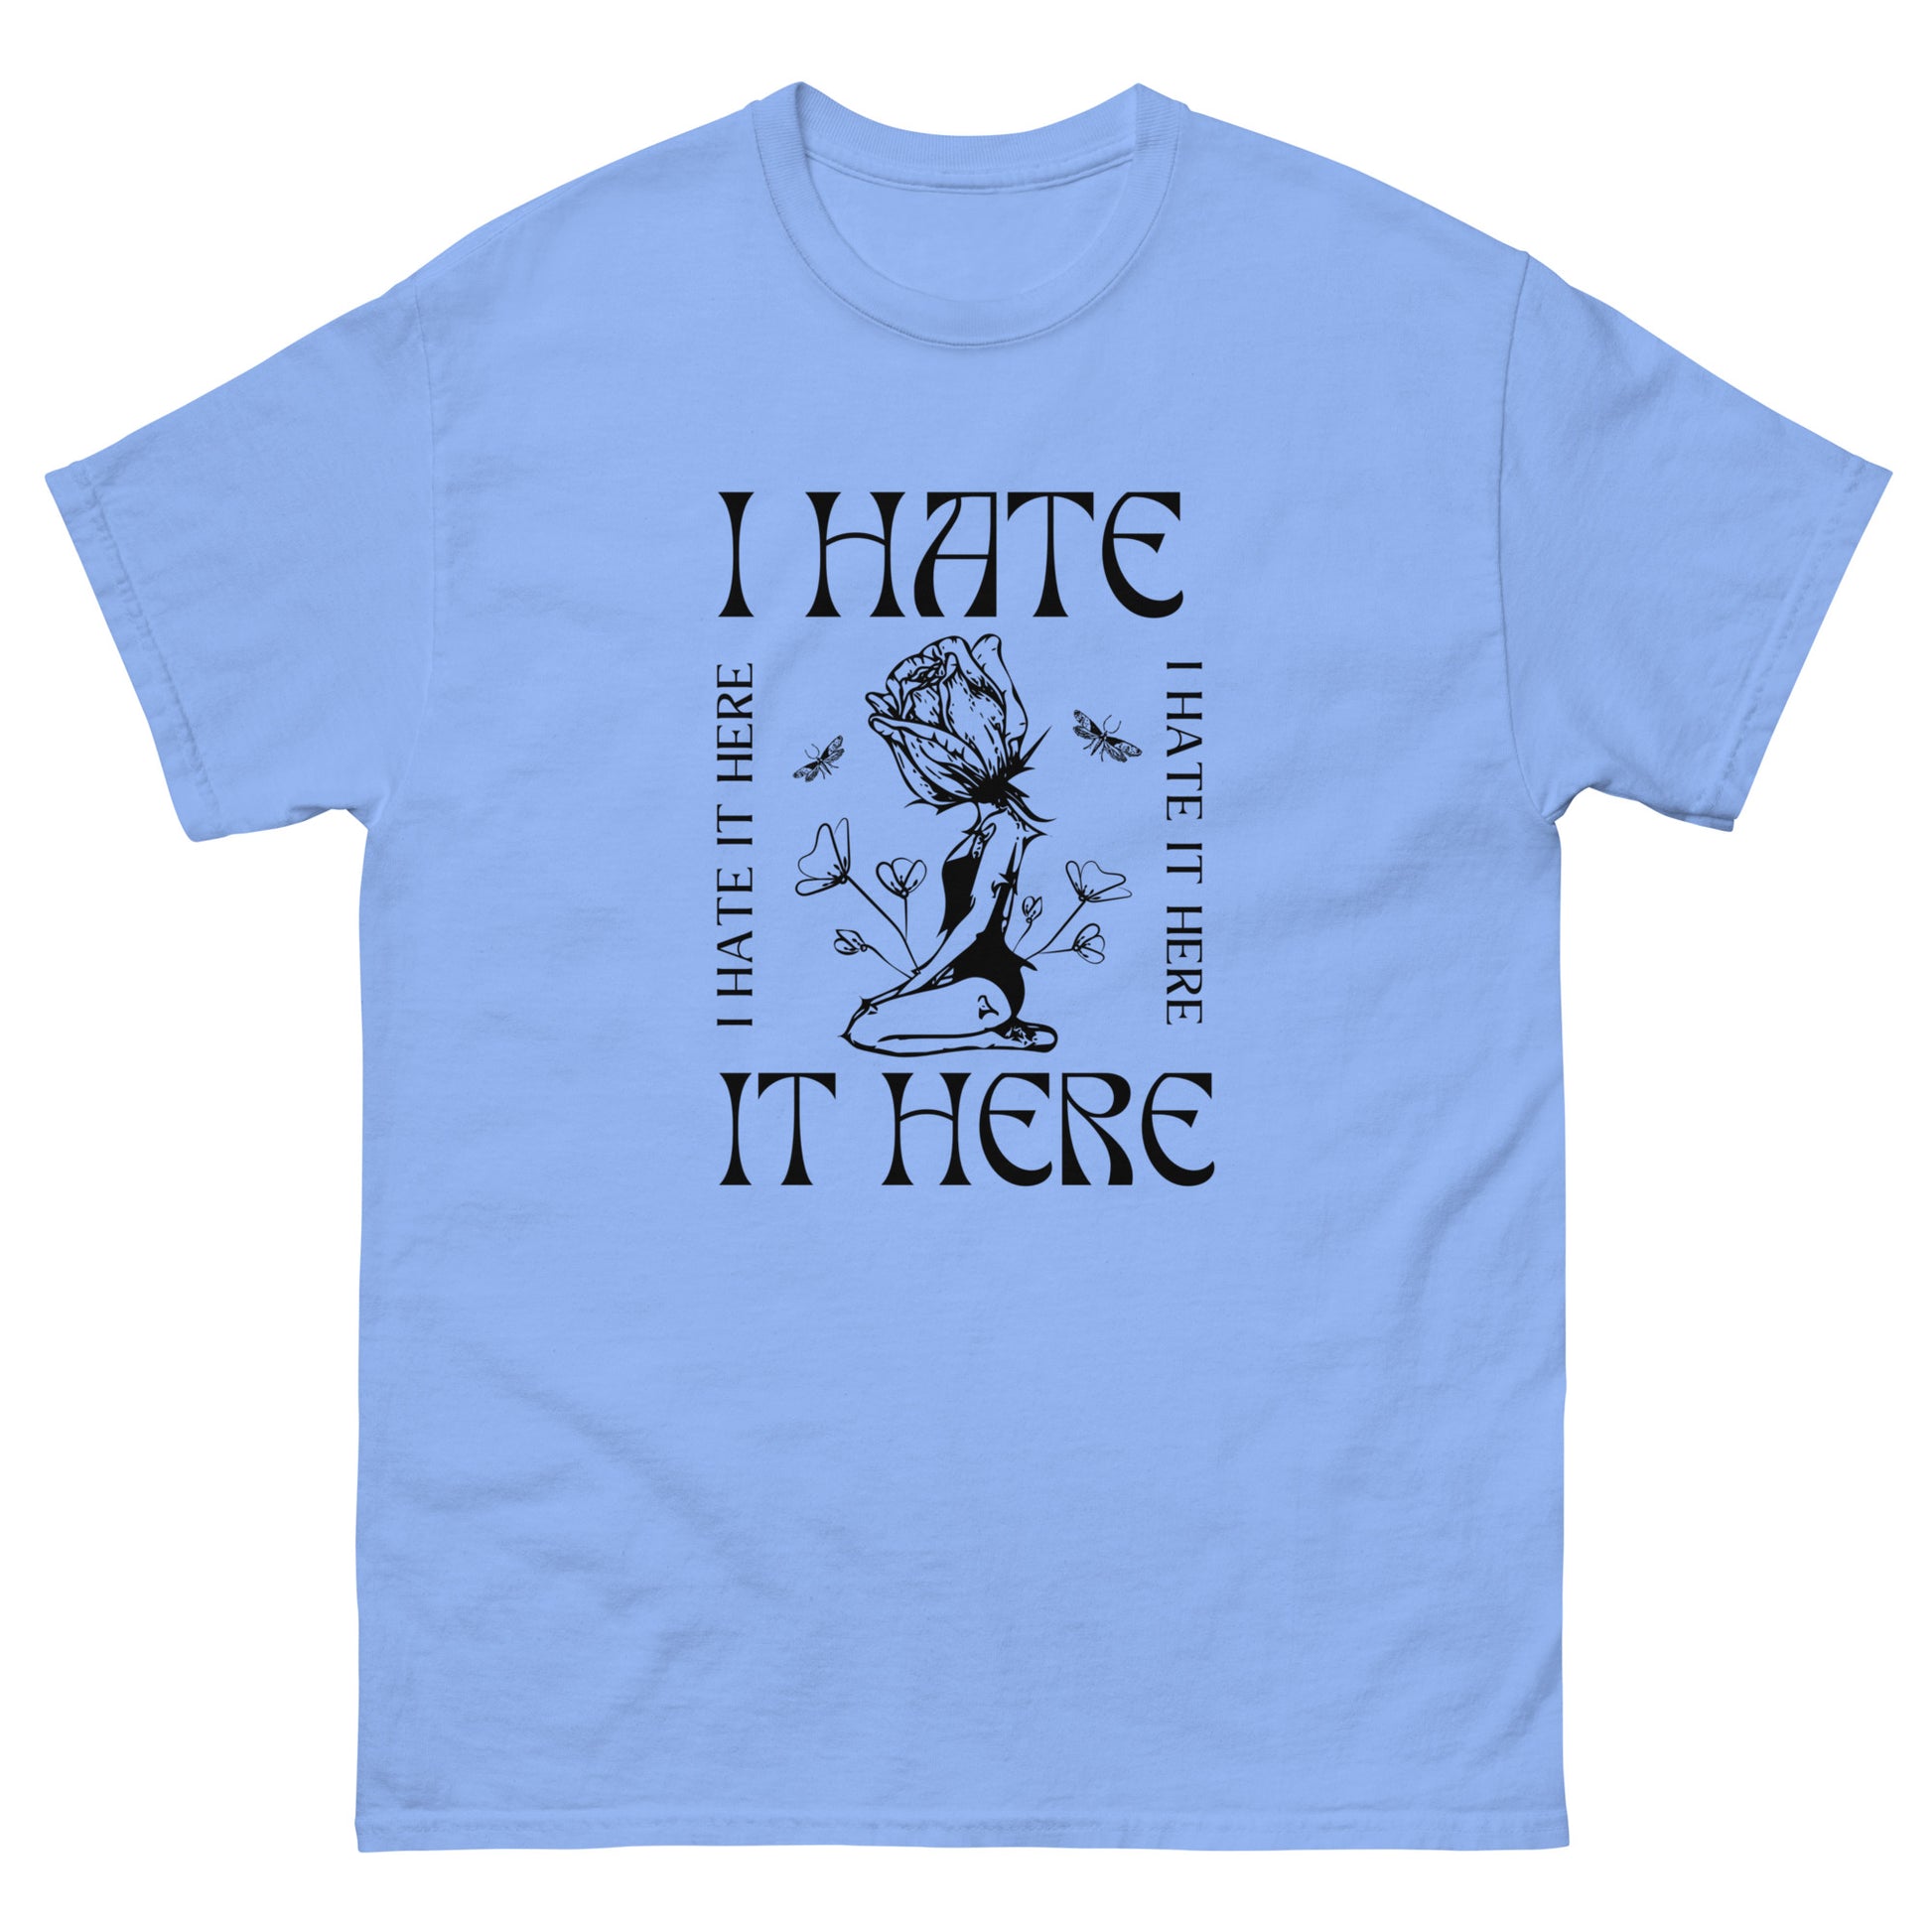 I Hate it Here Gildan classic tee - Ghostly Tails